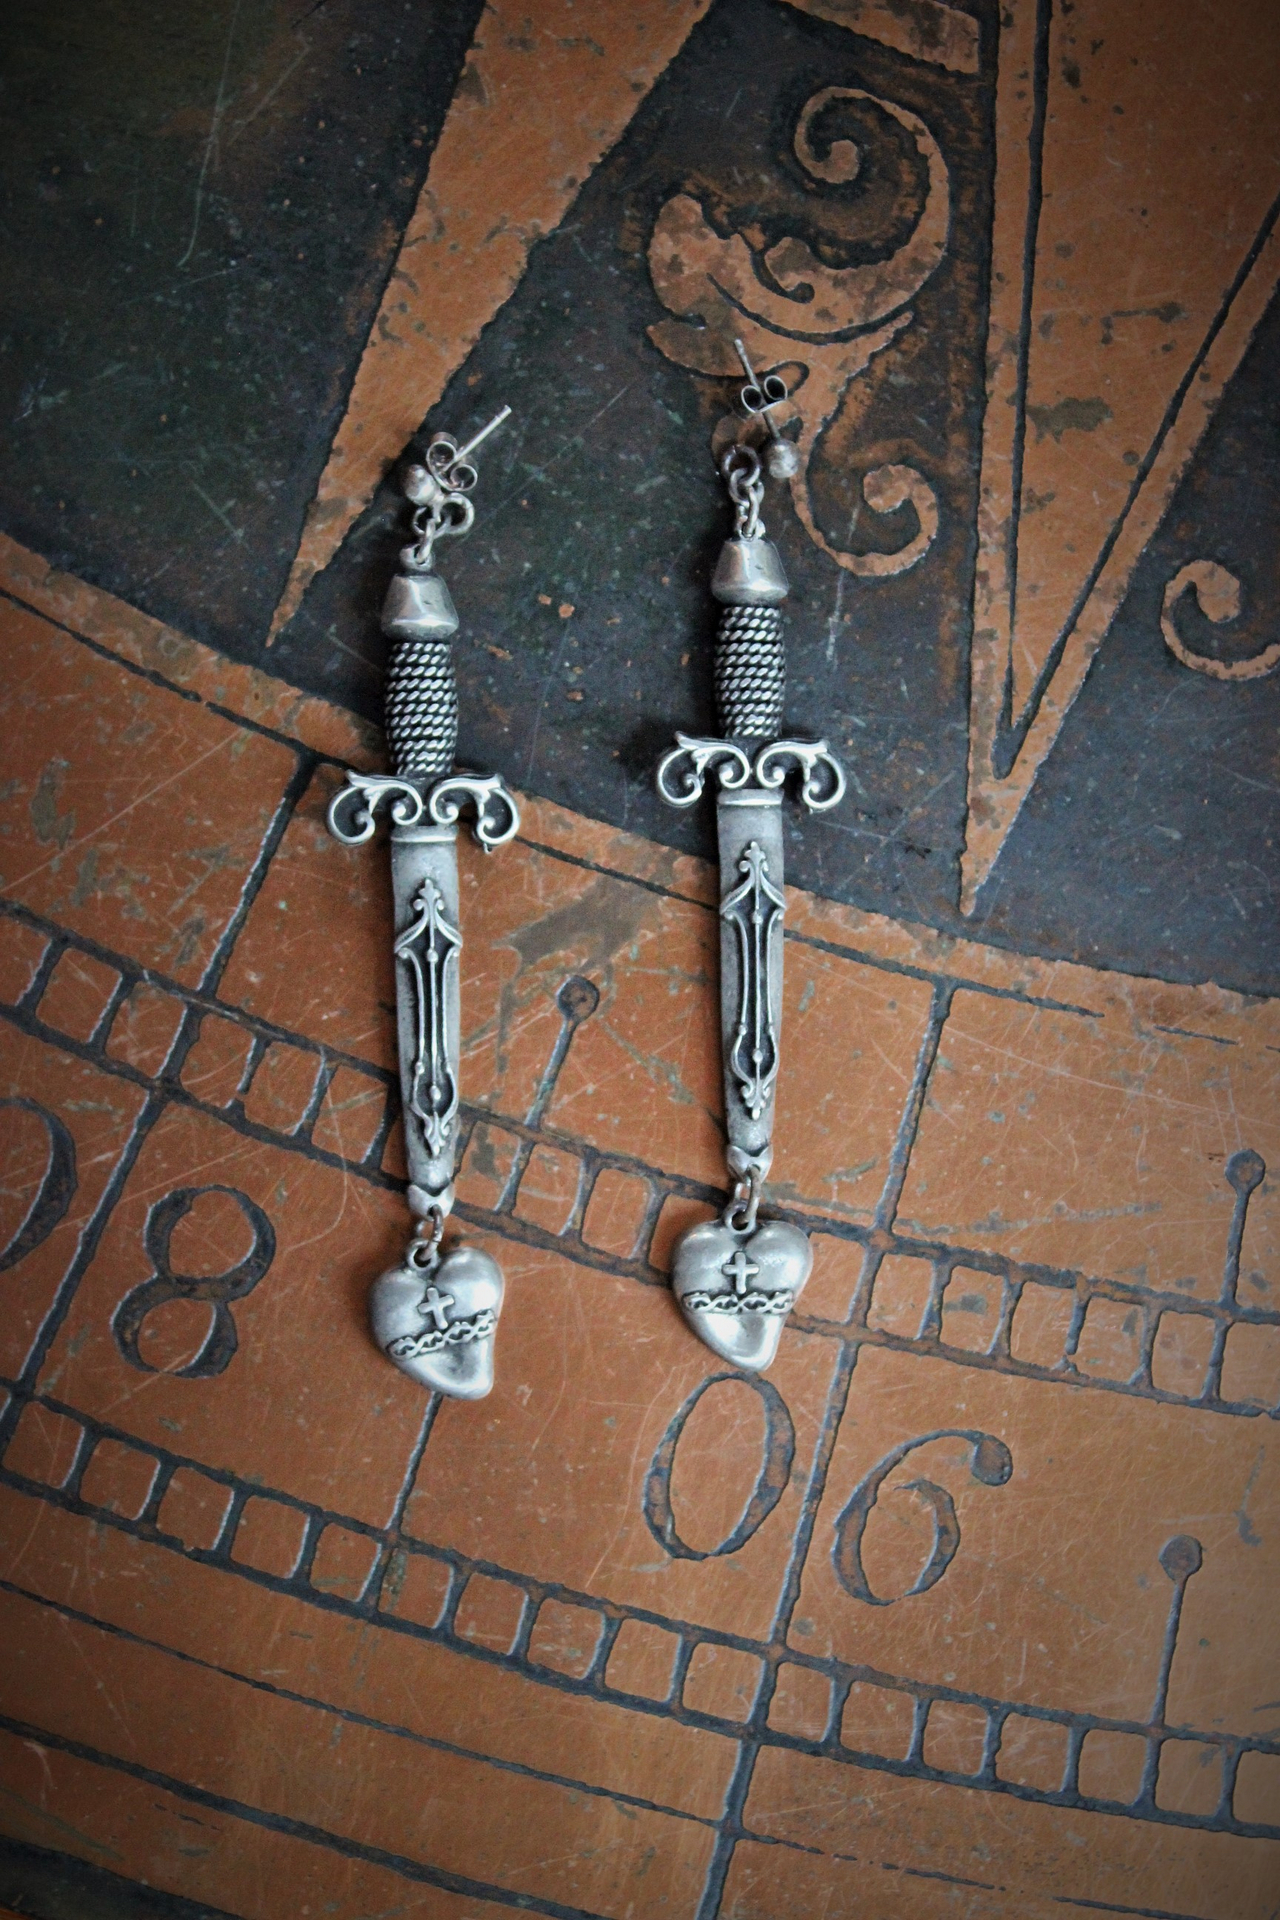 NEW! The Sword of Love Earrings with French Sword & Heart Medals, Sterling Posts